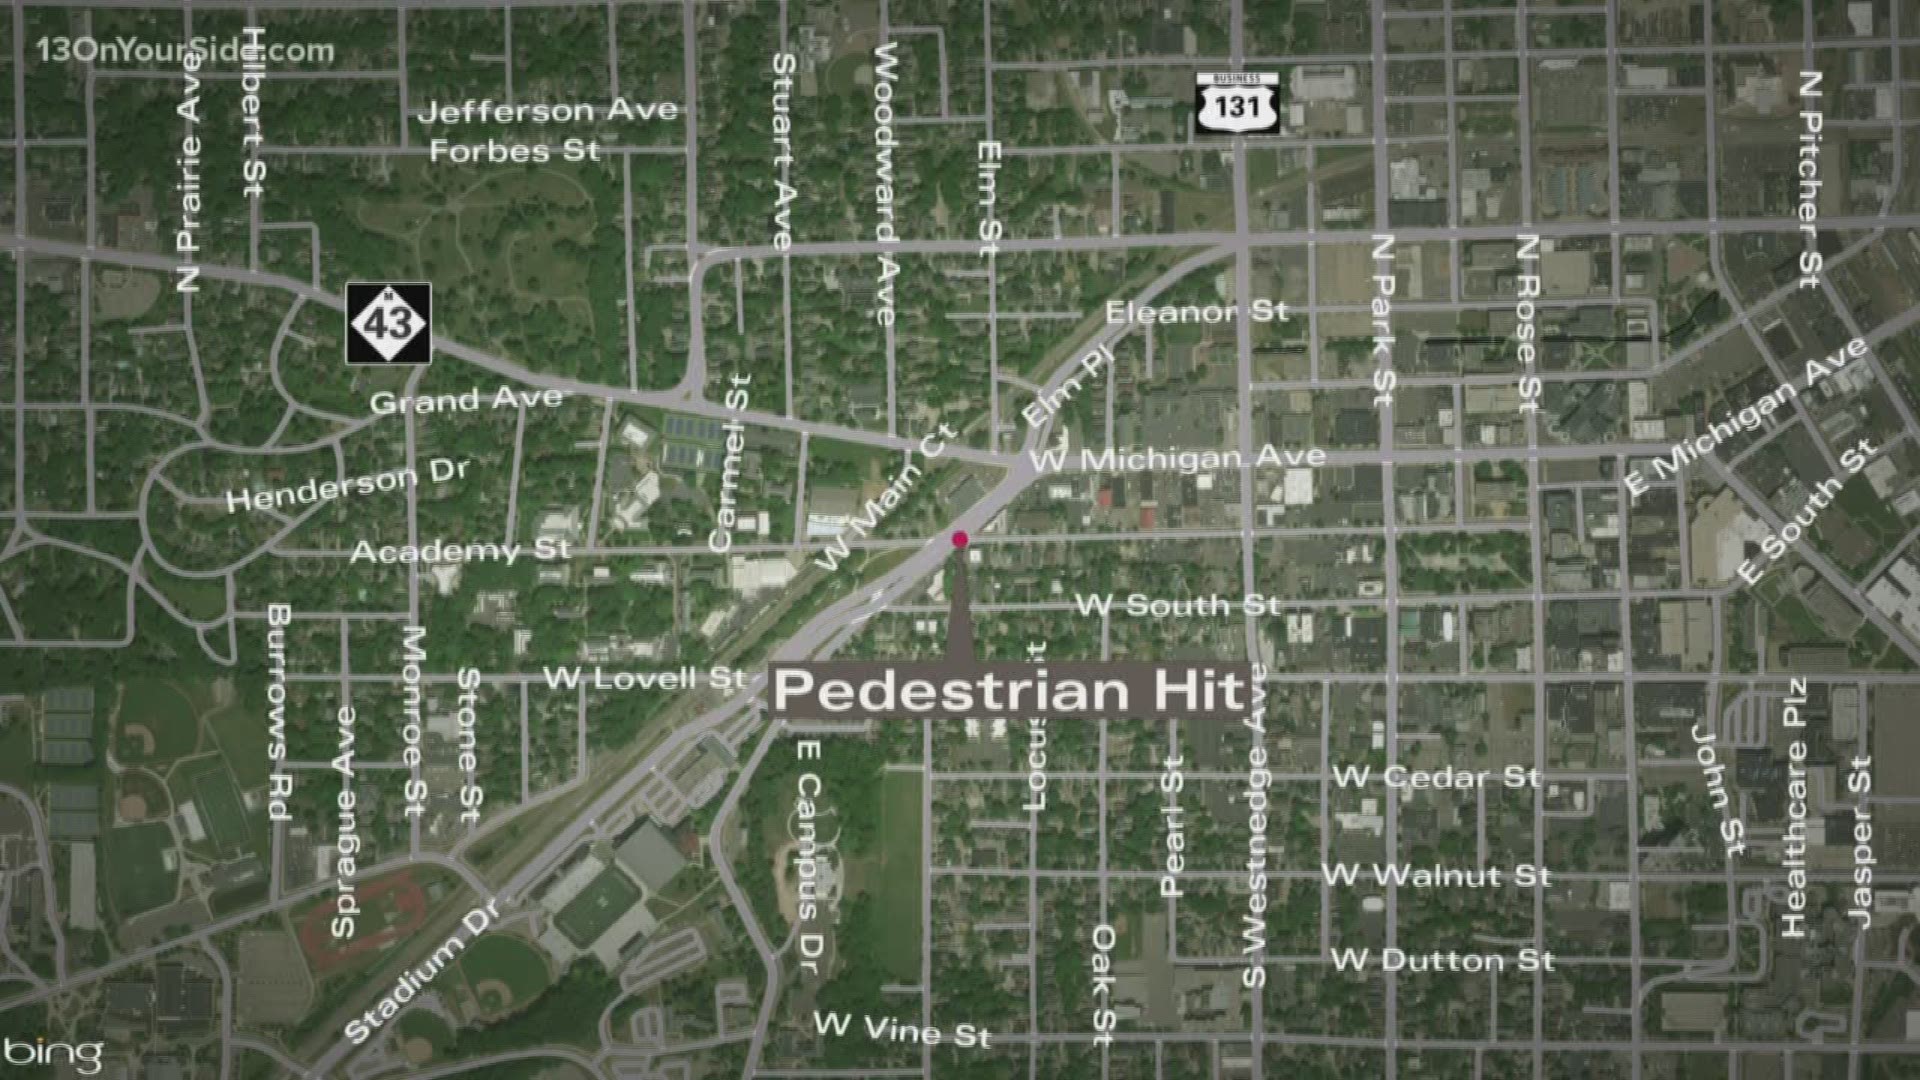 iin Kalamazoo a 32-year-old man was hit bay a car while walking near the intersection of South Rose and Academy Street at 1:45am. The driver was arrested.